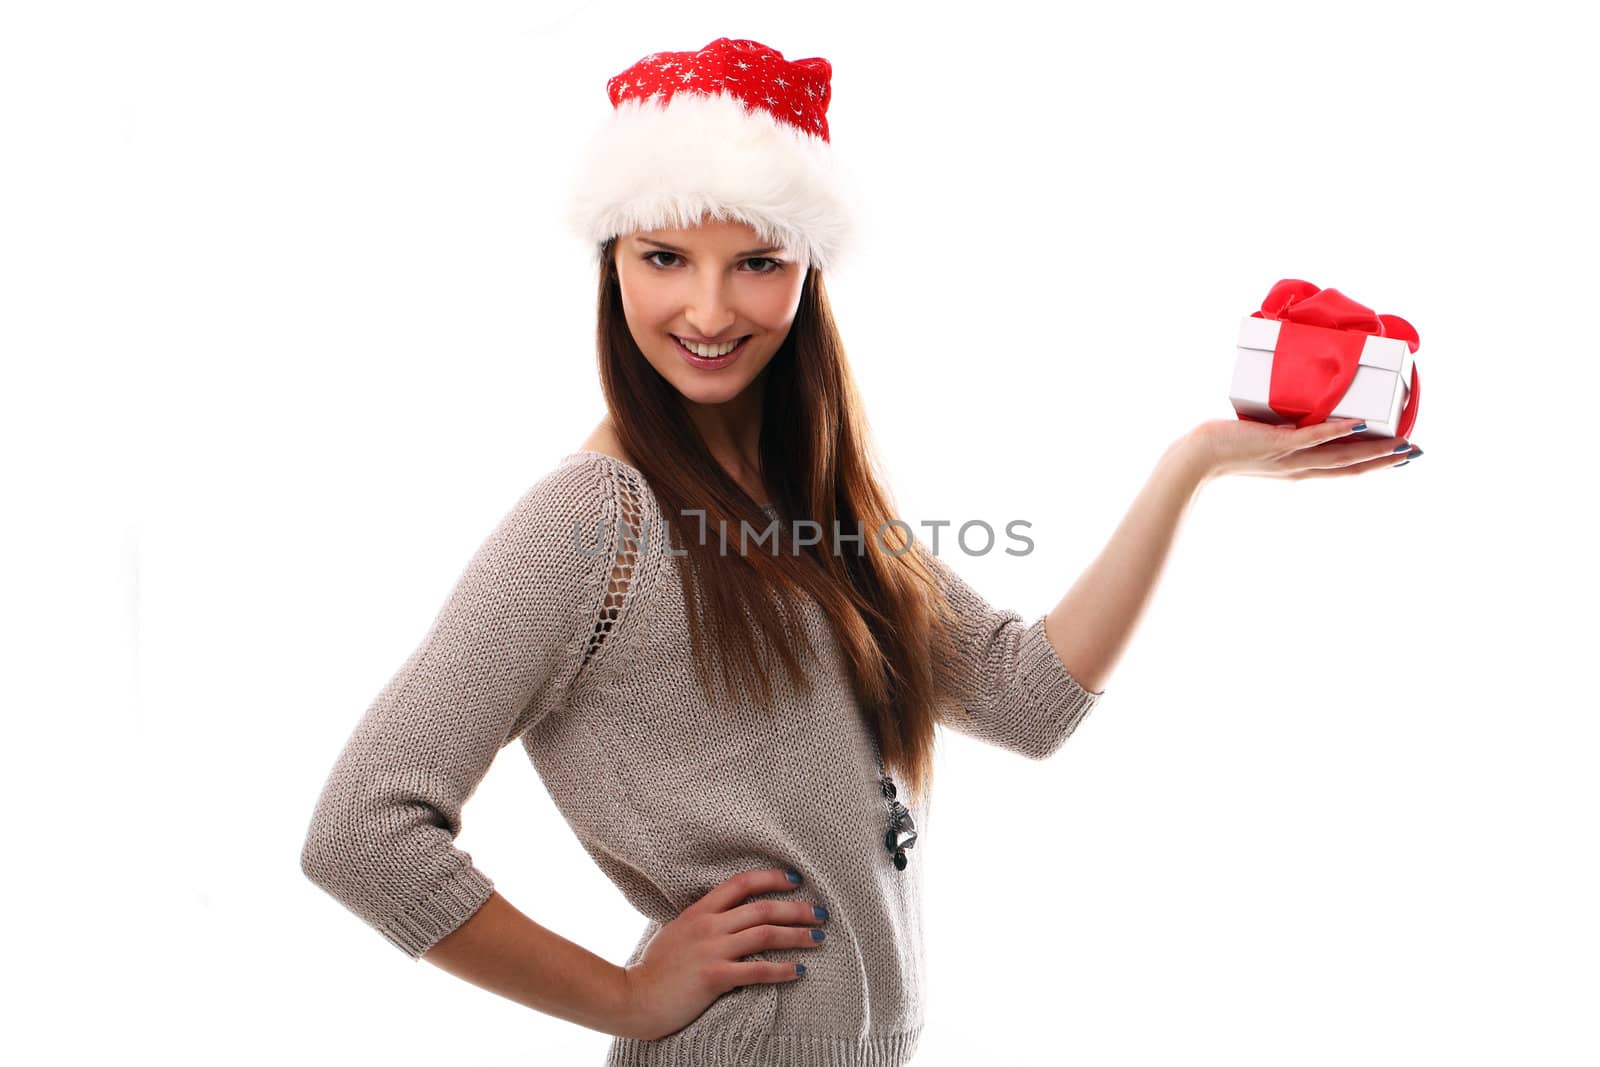 Beautiful girl smiling in christmas hat and holding gift over a white background